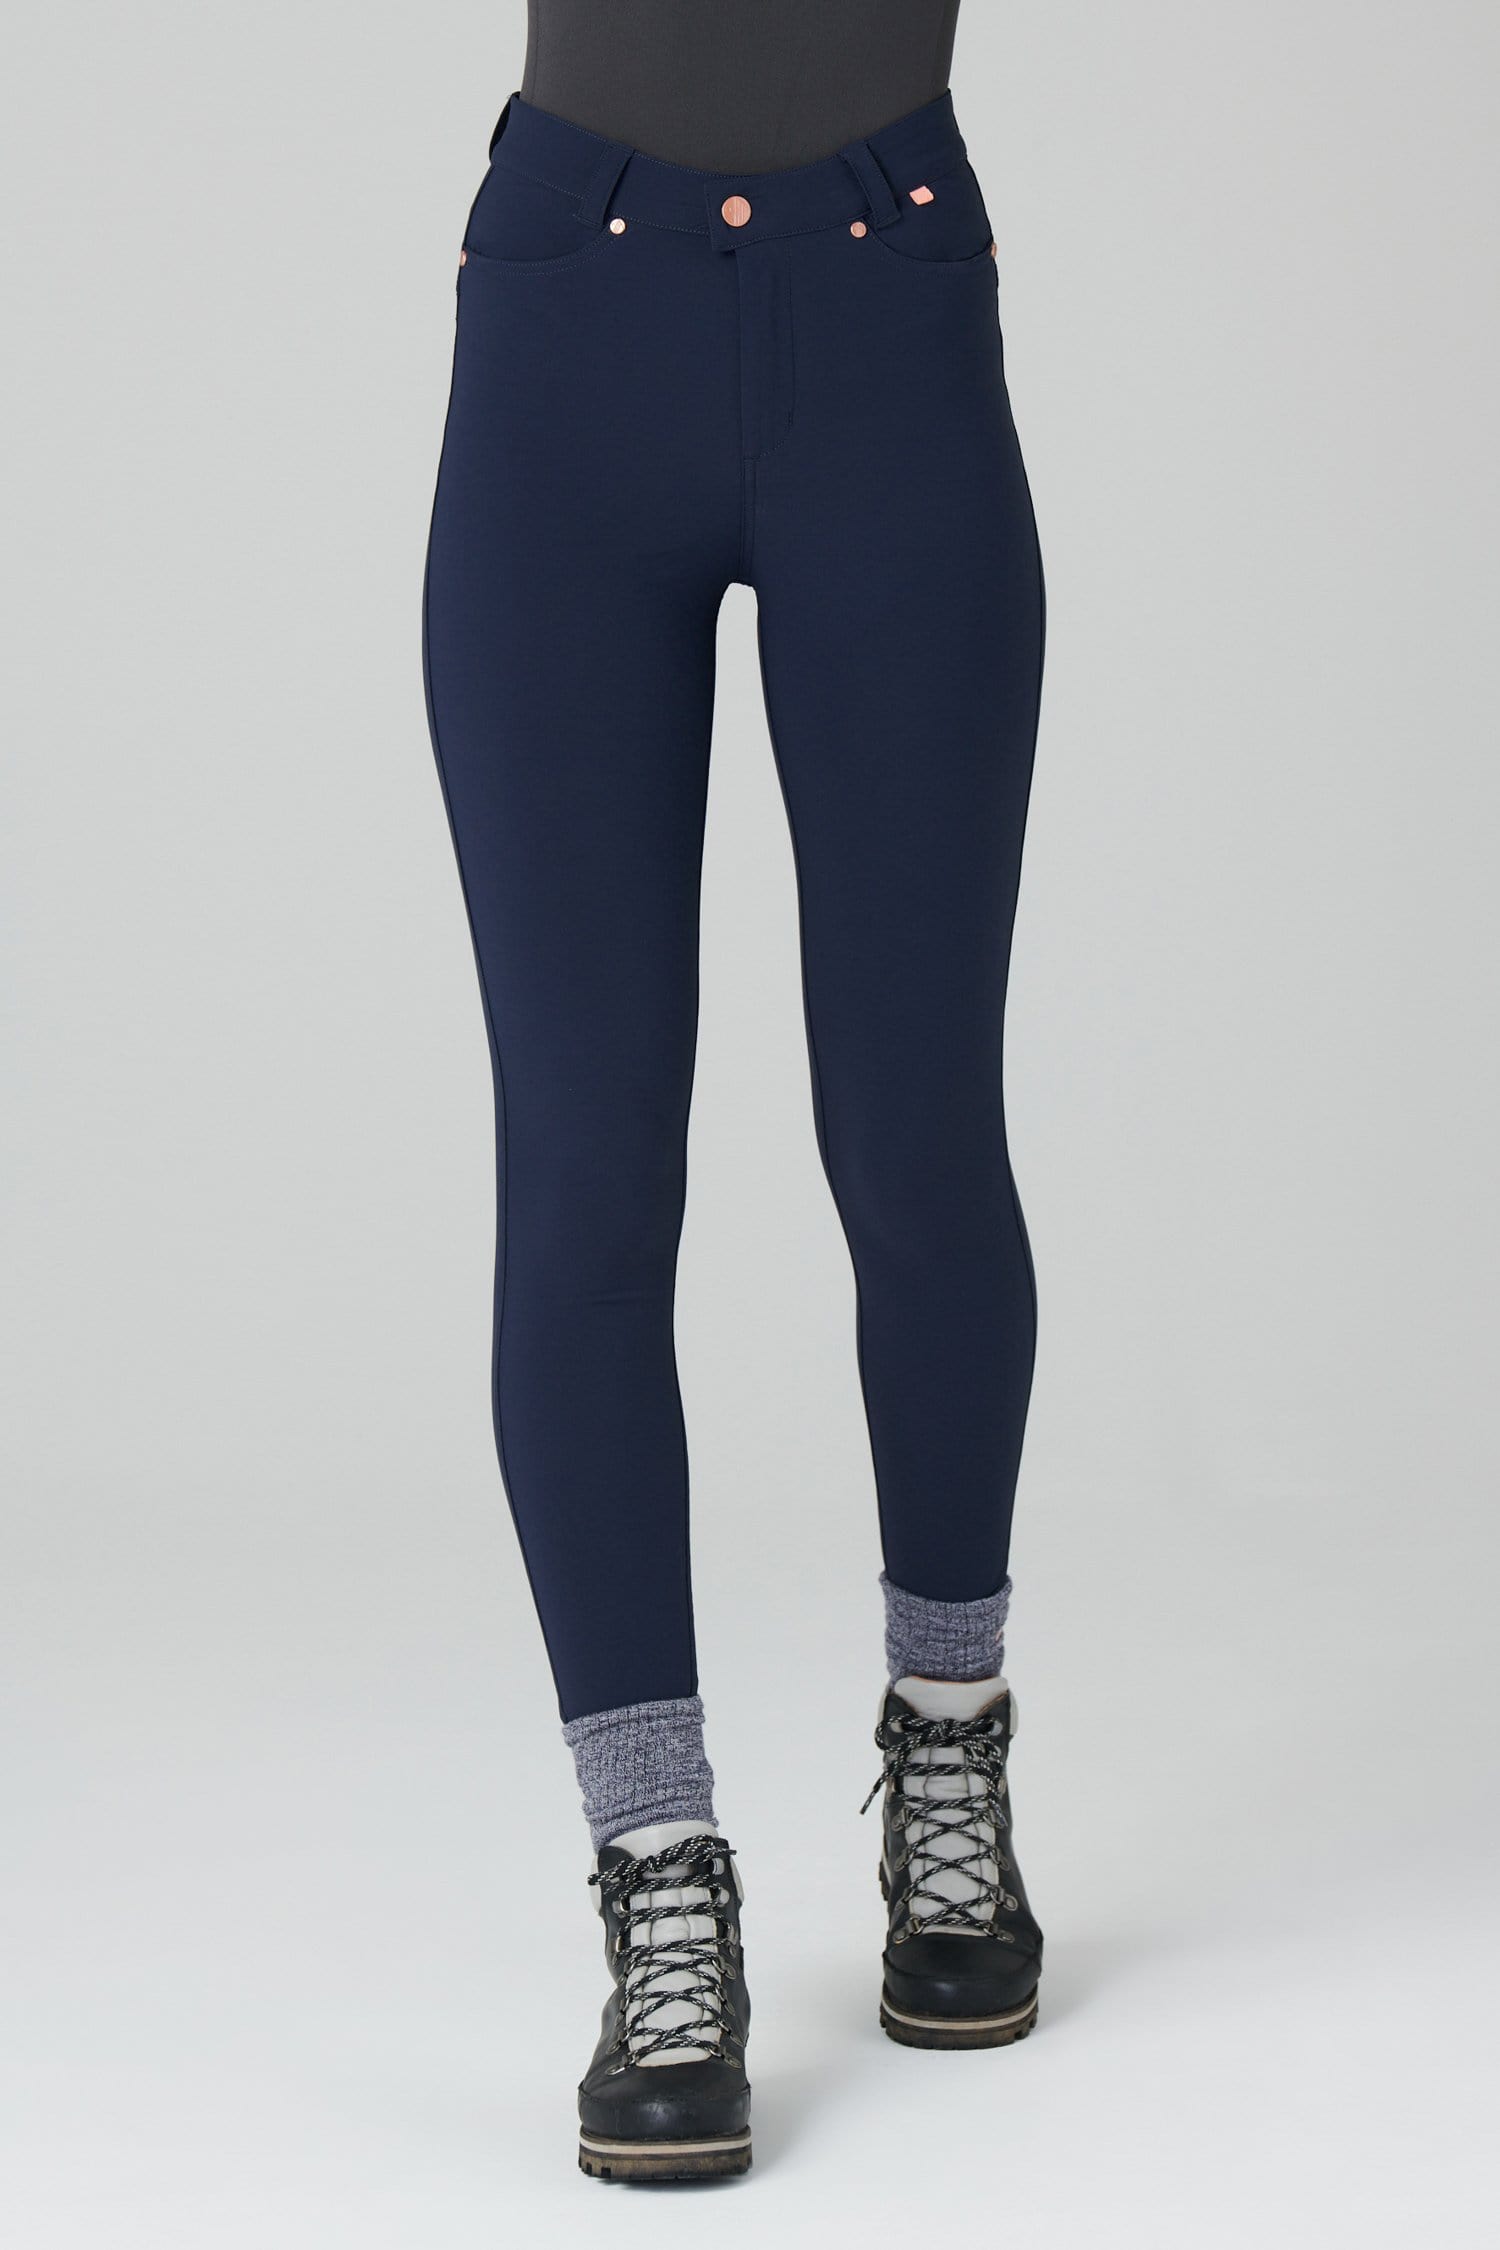 Max Stretch Skinny Outdoor Trousers - Deep Navy - 28l / Uk10 - Womens - Acai Outdoorwear